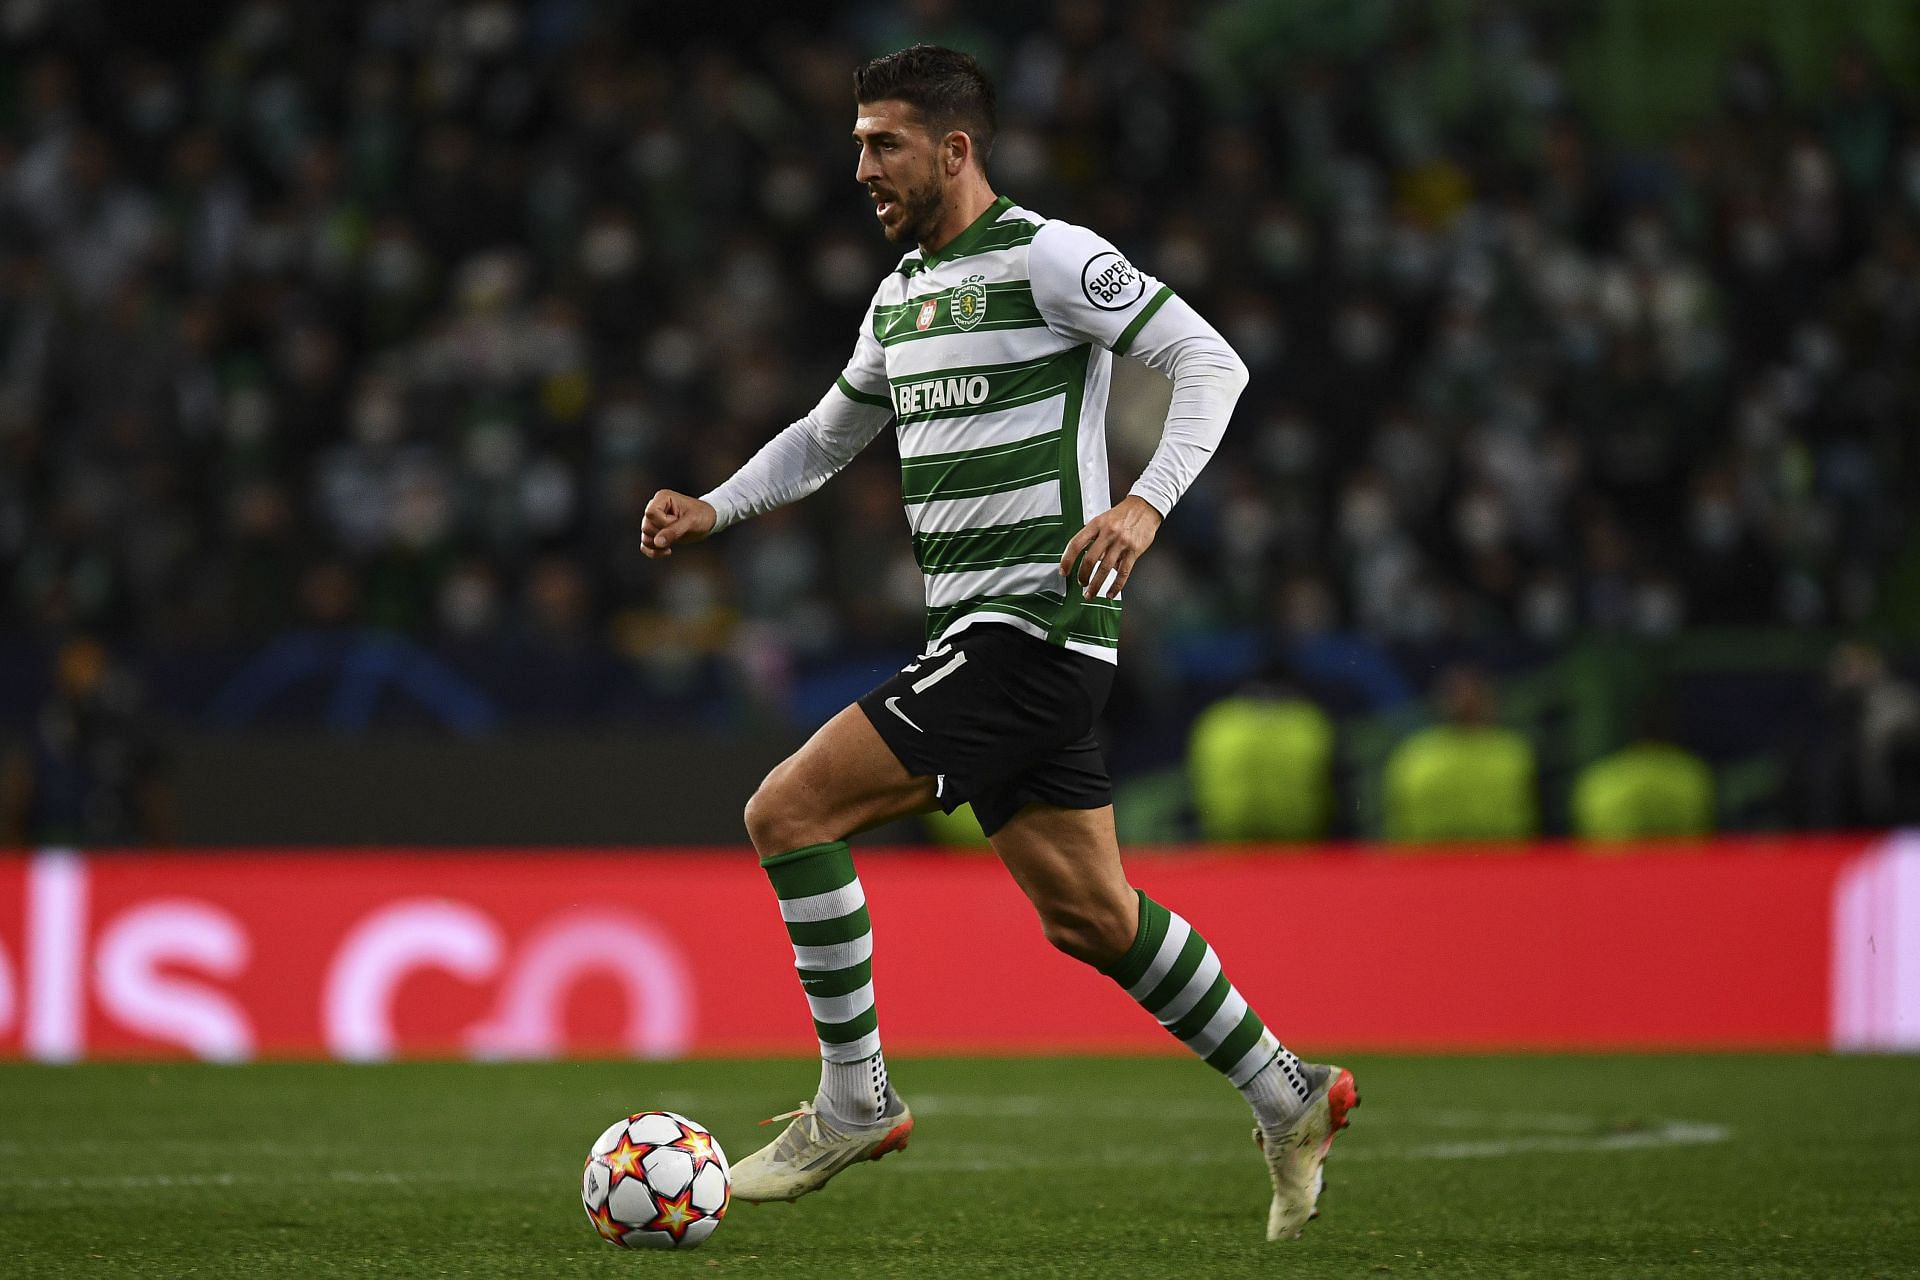 Sporting need to overcome Santa Clara in the semi-final as they hope to defend their trophy